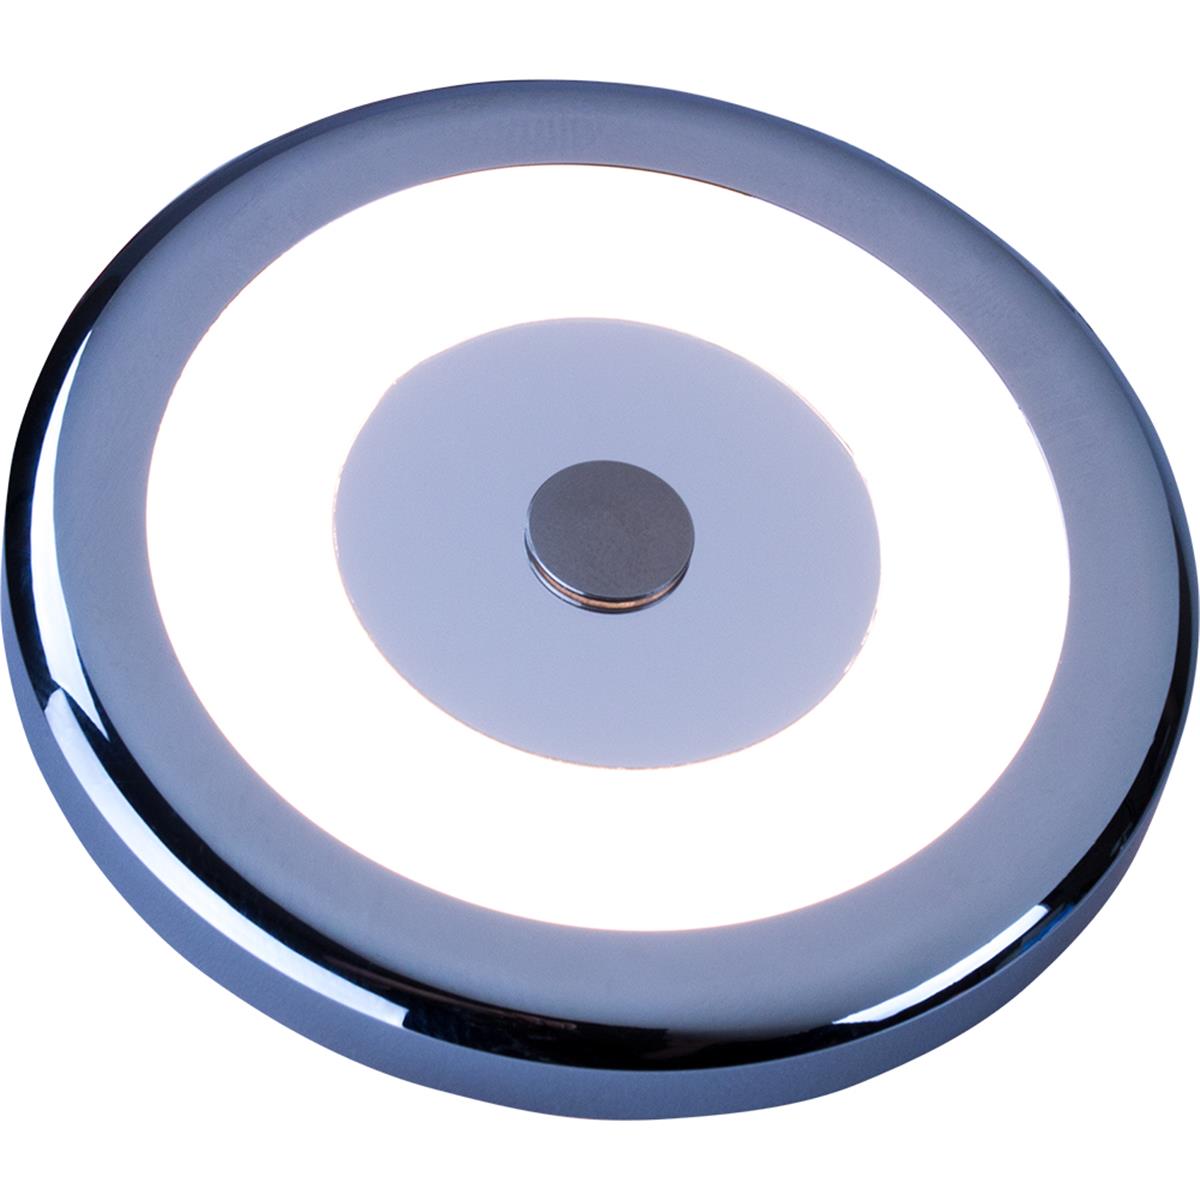 Picture of Sea-Dog 401686-1 LED Low Profile Task Light with Touch On & Off Dimmer Switch - 304 Stainless Steel